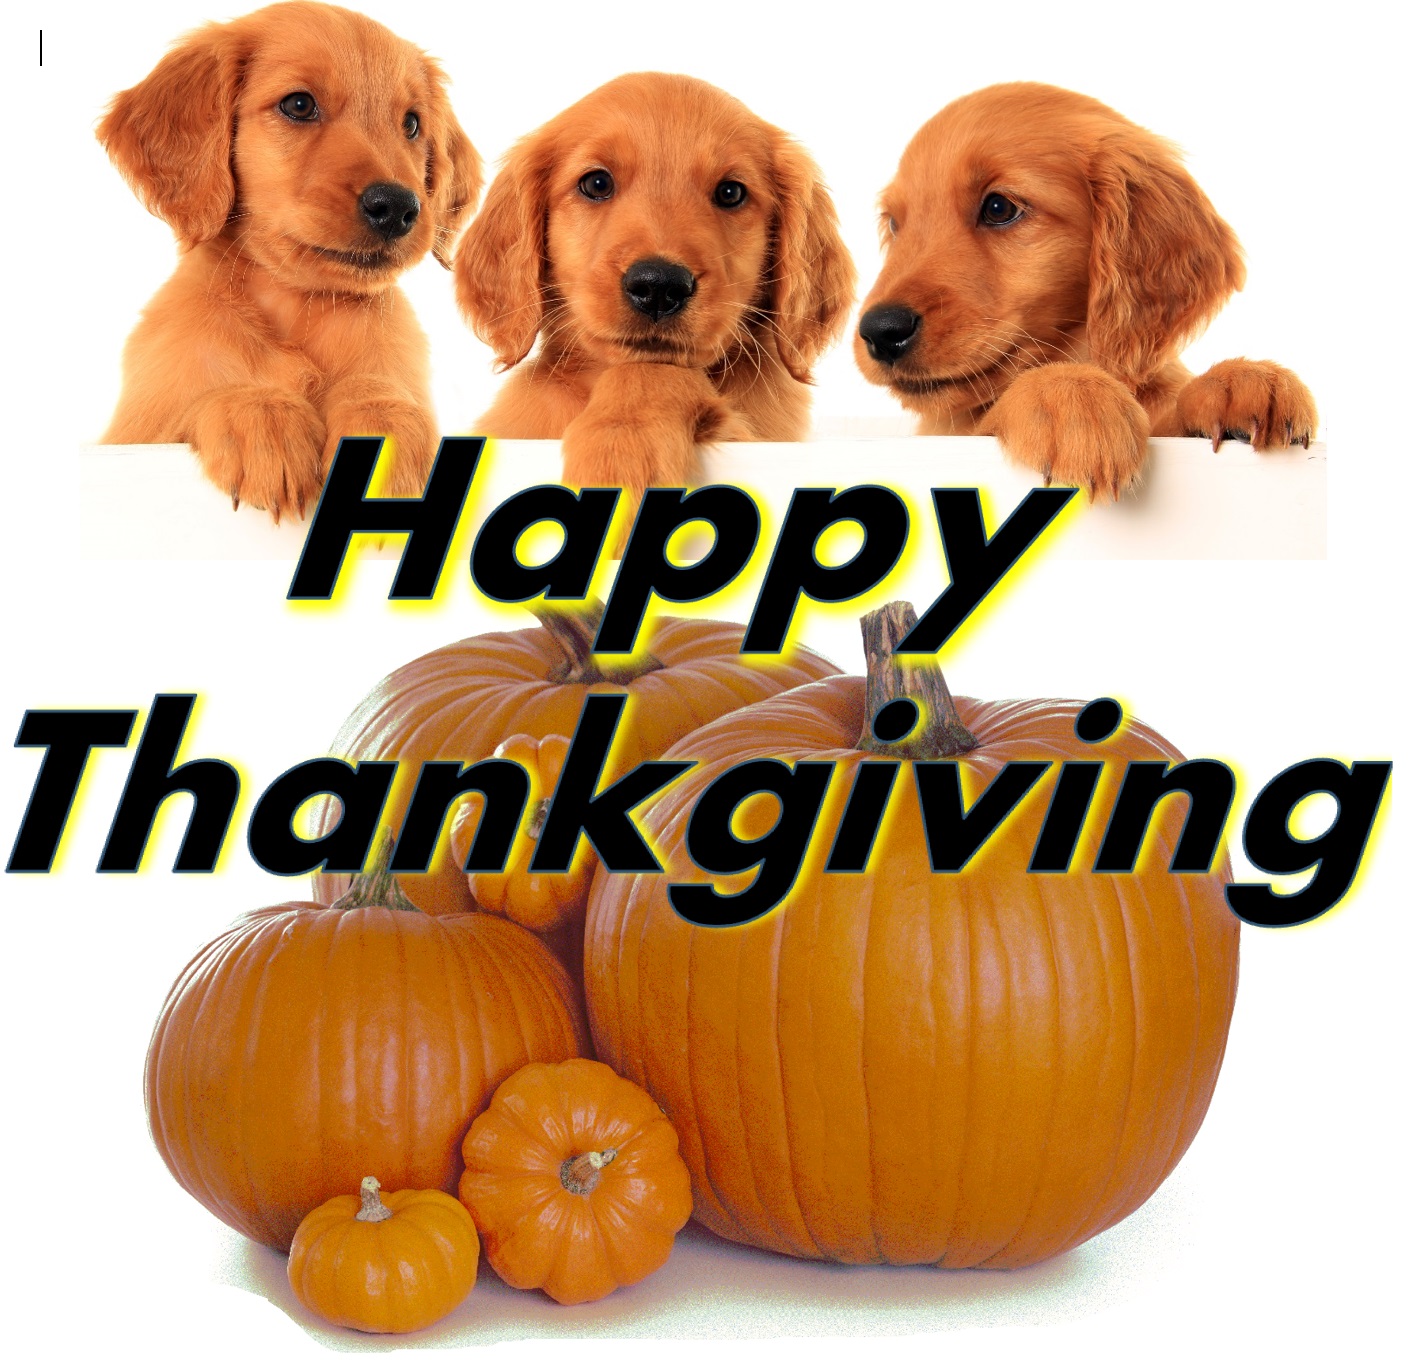 Happty Thanksgiving with for golden retreiver puppies.